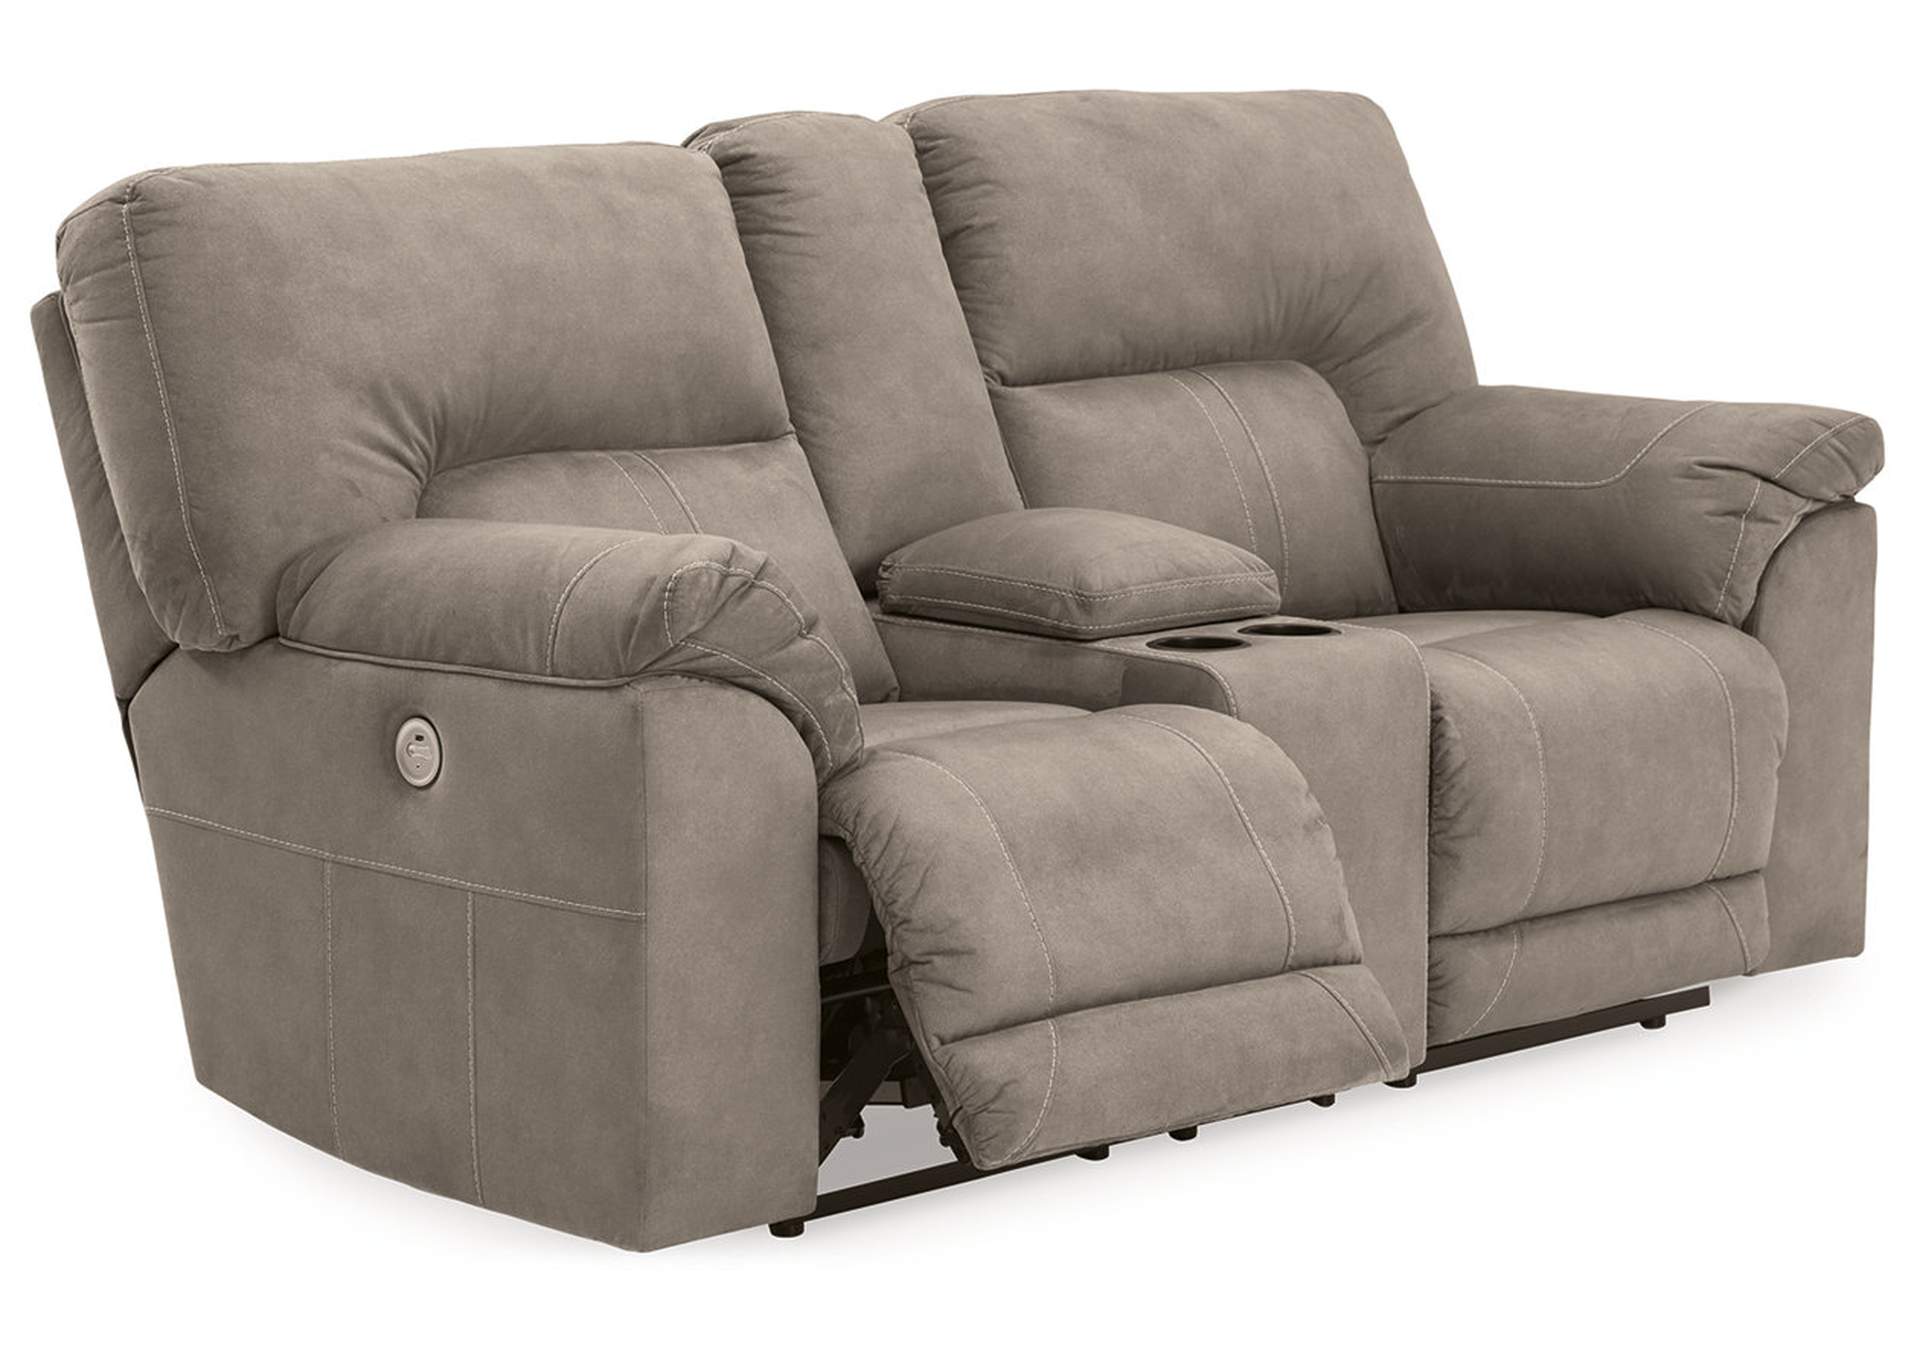 Cavalcade Power Reclining Loveseat with Console,Benchcraft